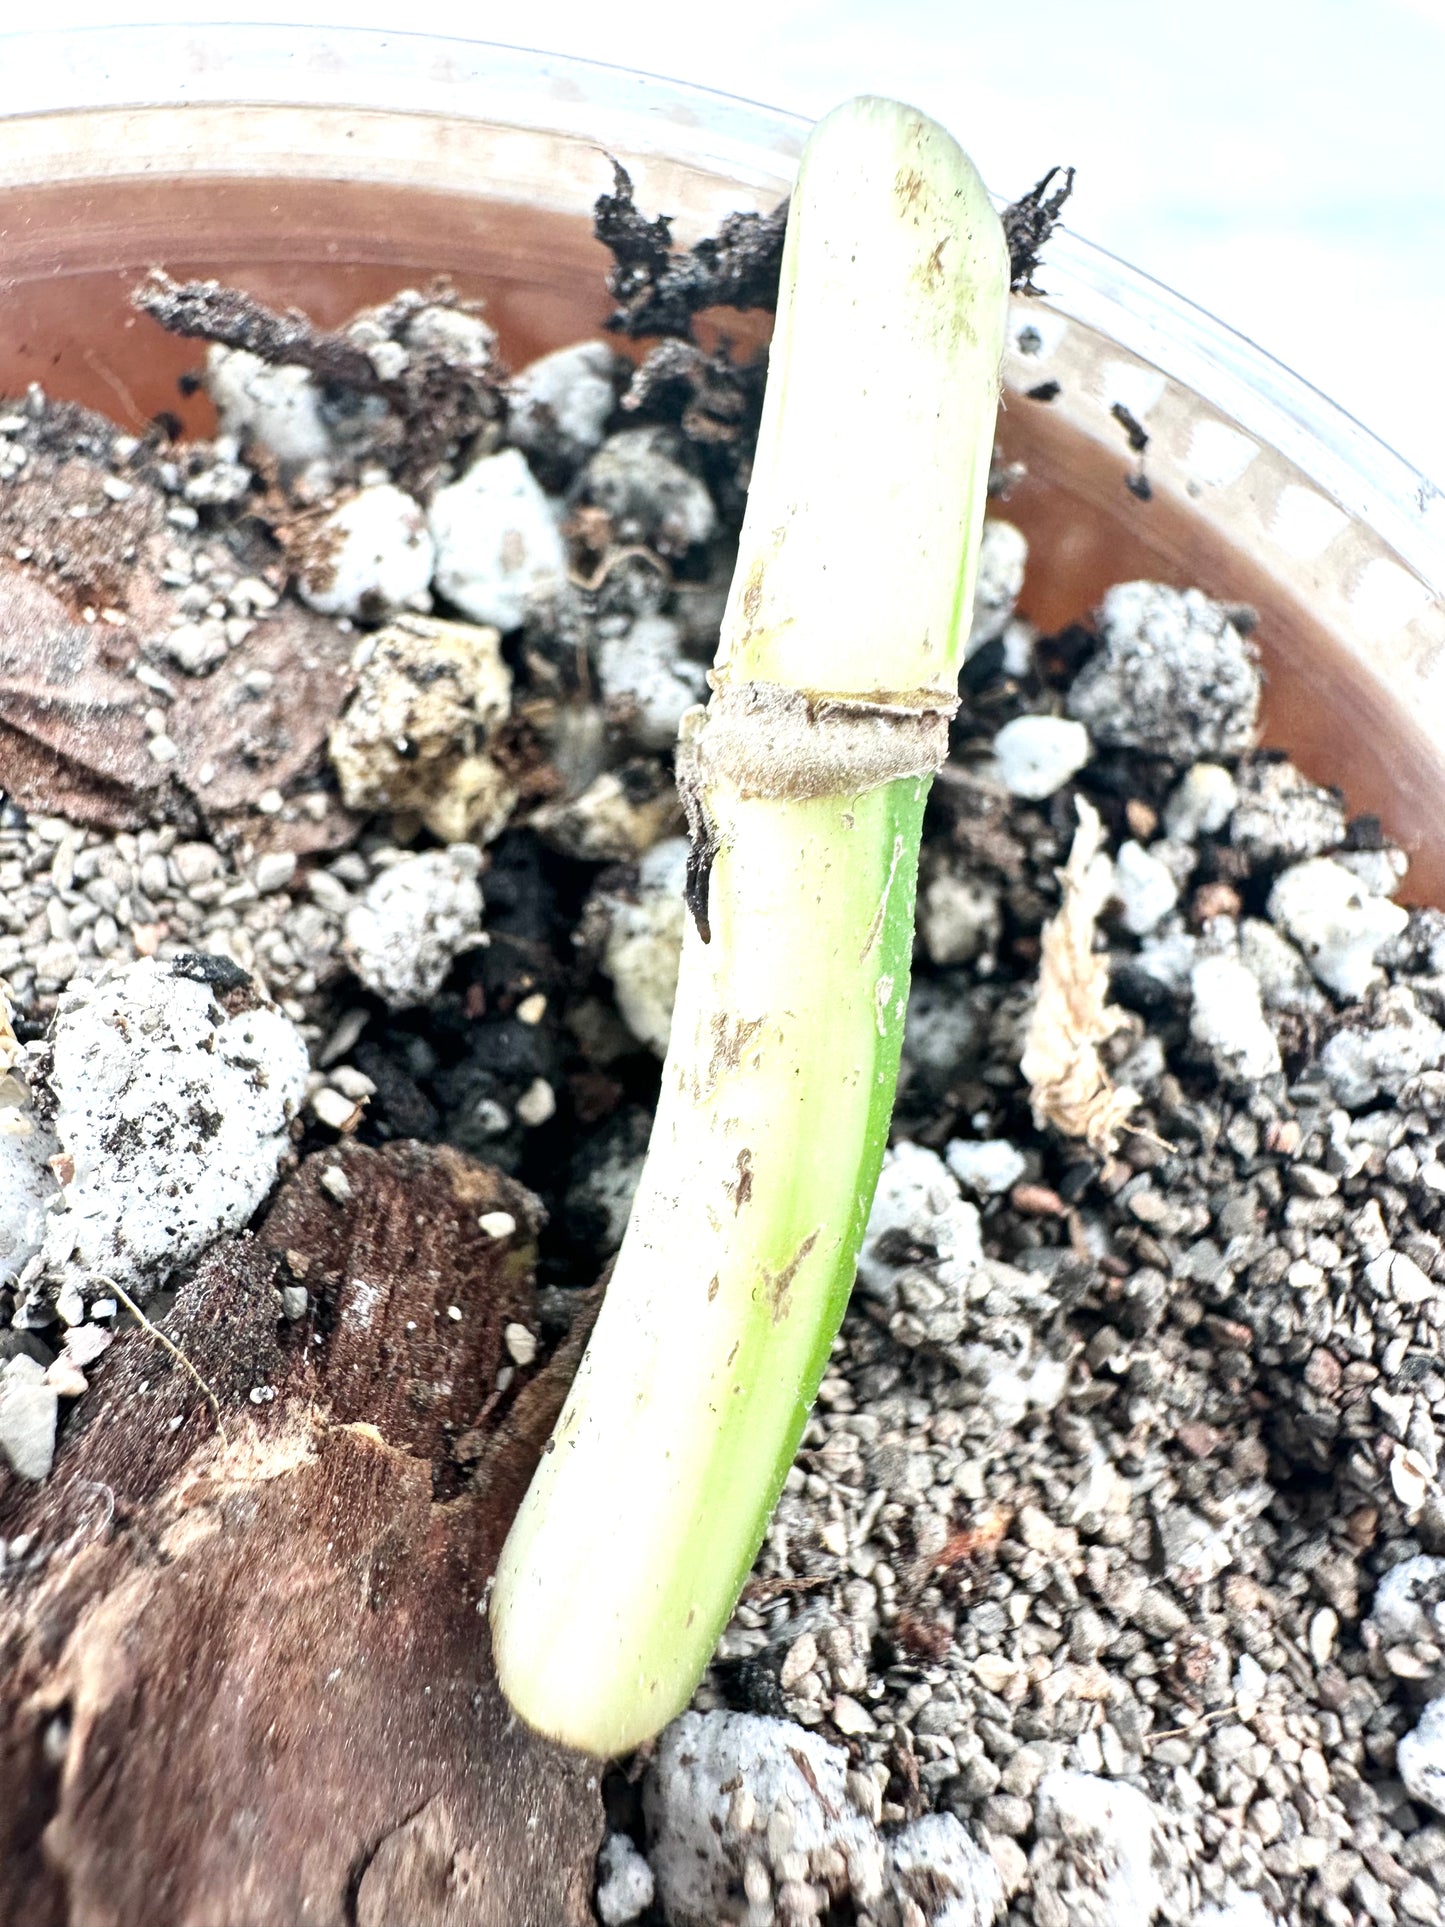 Monstera Mint Noid rooted node 1 growing bud